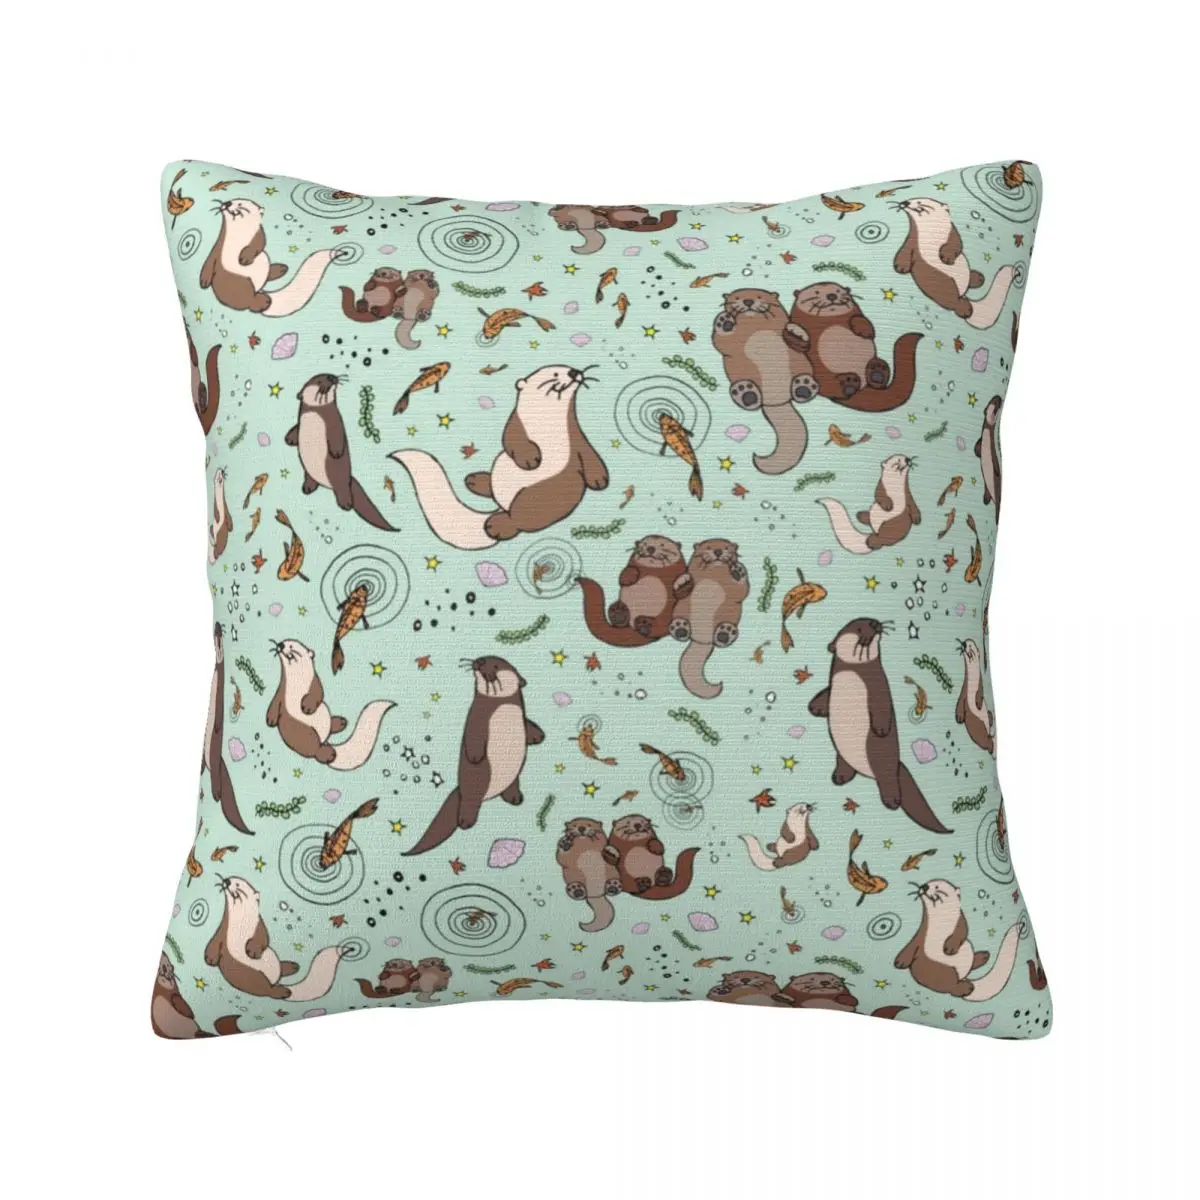 

Sea Otters Kawaii Pillowcase Soft Fabric Cushion Cover Decor Gifts for Kids Shaggy Pillow Case Cover Home Wholesale 45X45cm